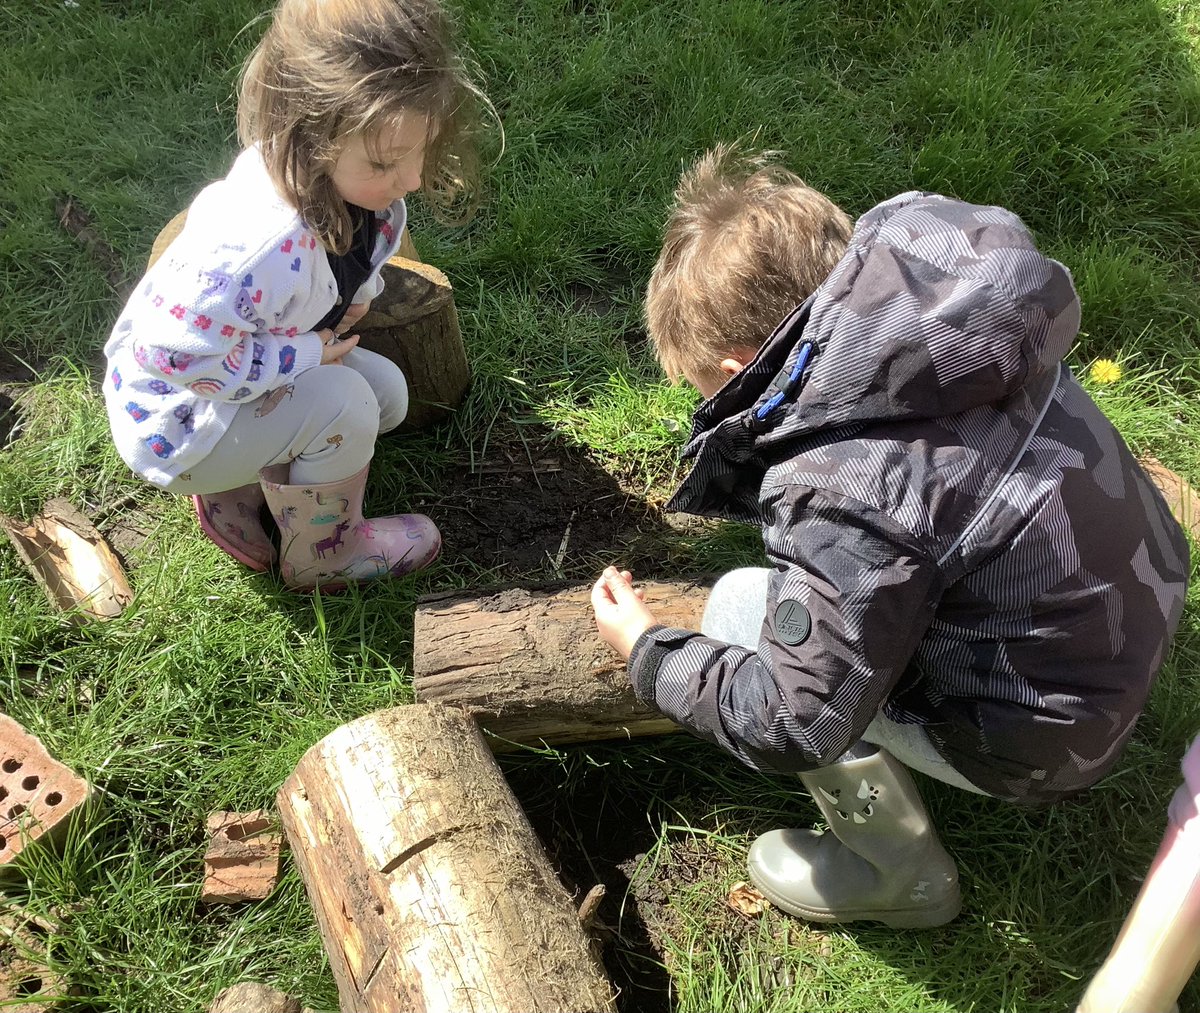 Our Little Learners have been learning and exploring as we discover things all about growth, change and our natural environment. Bug hunting, drawing beans and beanstalks and reading ‘10 Seeds’ which incorporates lots of math too with our 5 frames.
@_TPLT_ @EmmaB_Principal